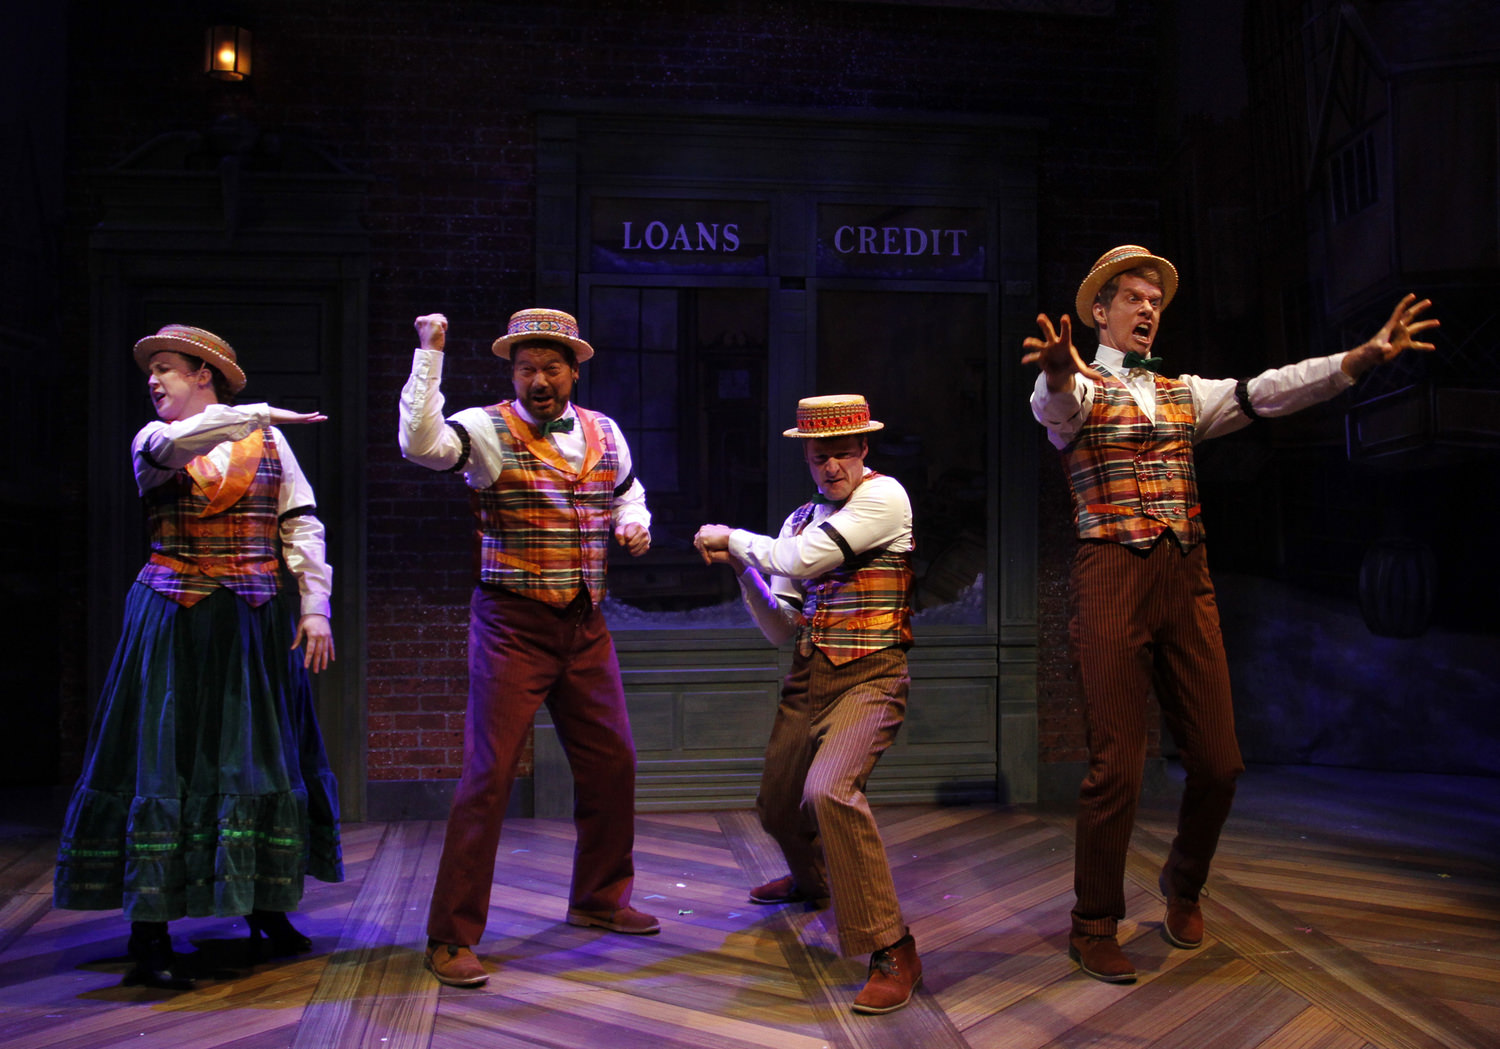 A barbershop quartet, Mr. Scrooge? In this show, anything goes!
-Reg Madison Photography